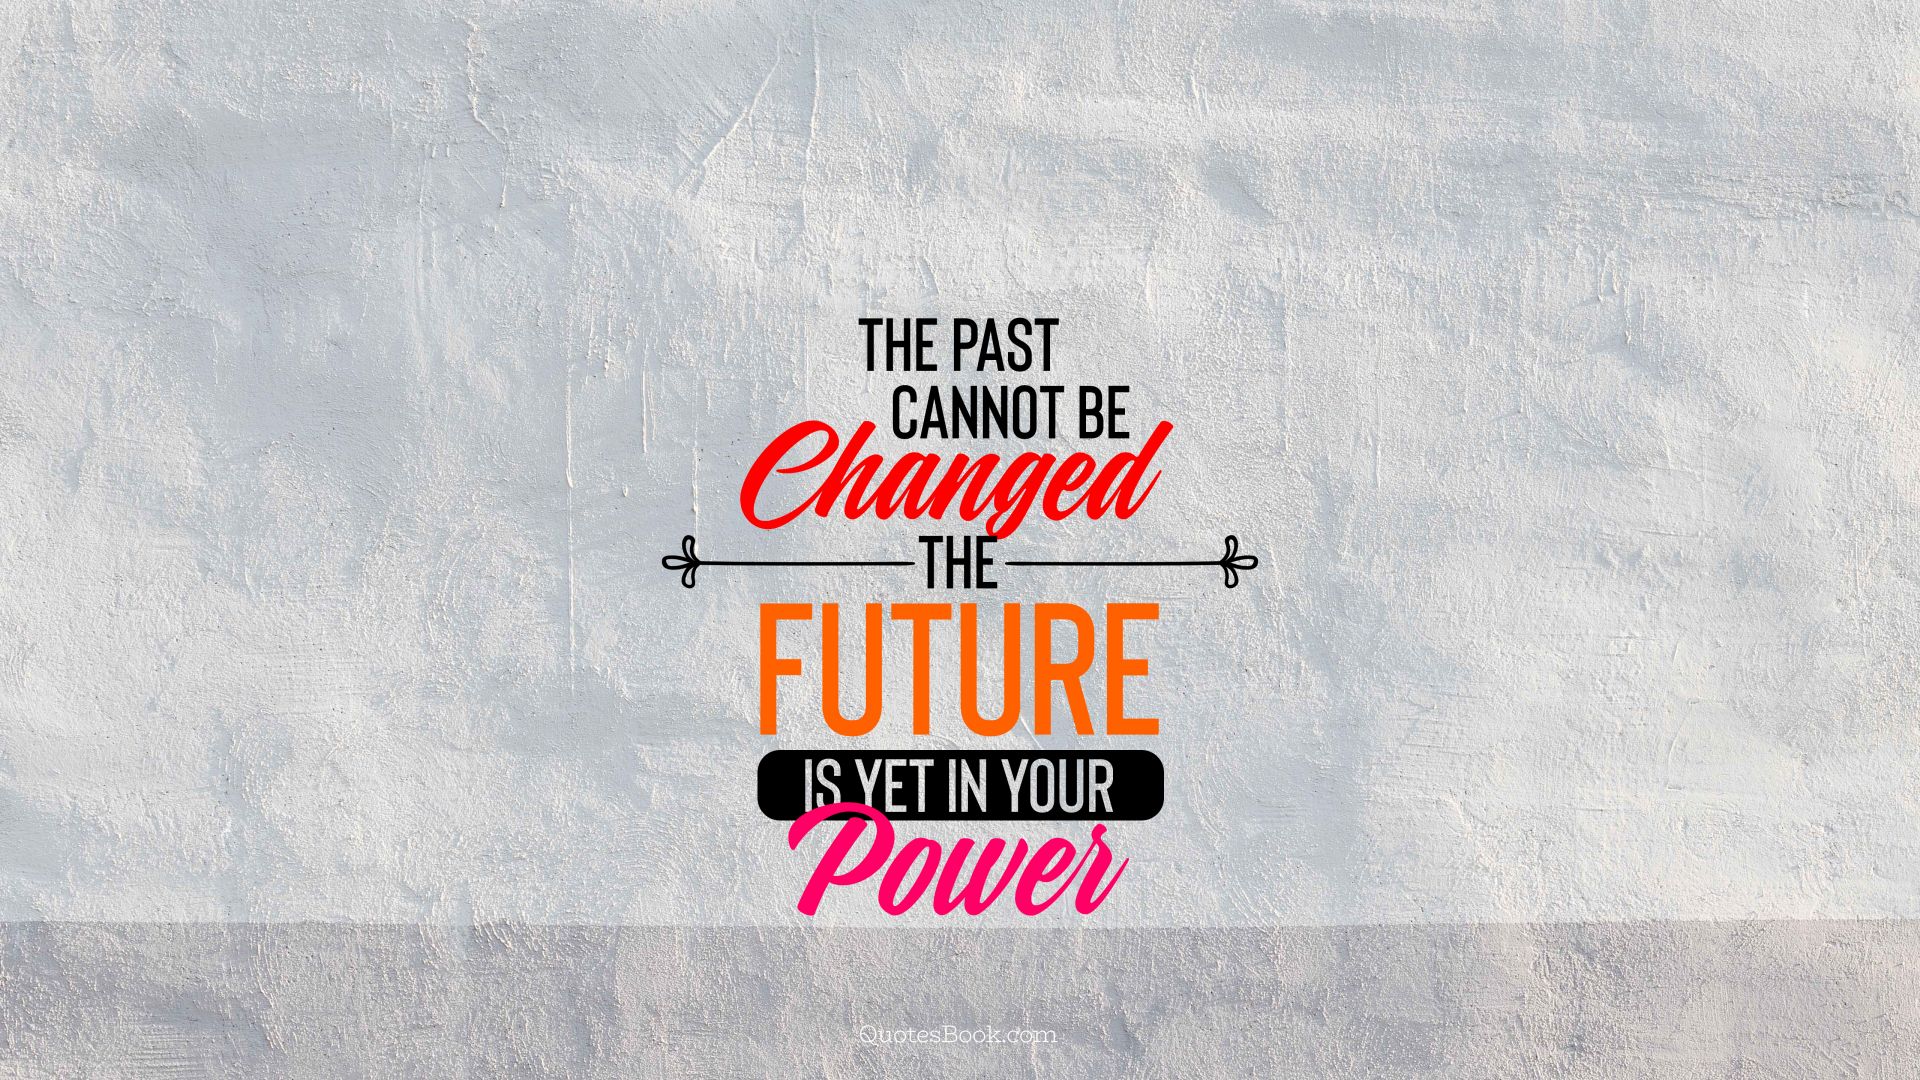 The past cannot be changed the future is yet in your power. - Quote by H. Jackson Brown, Jr.